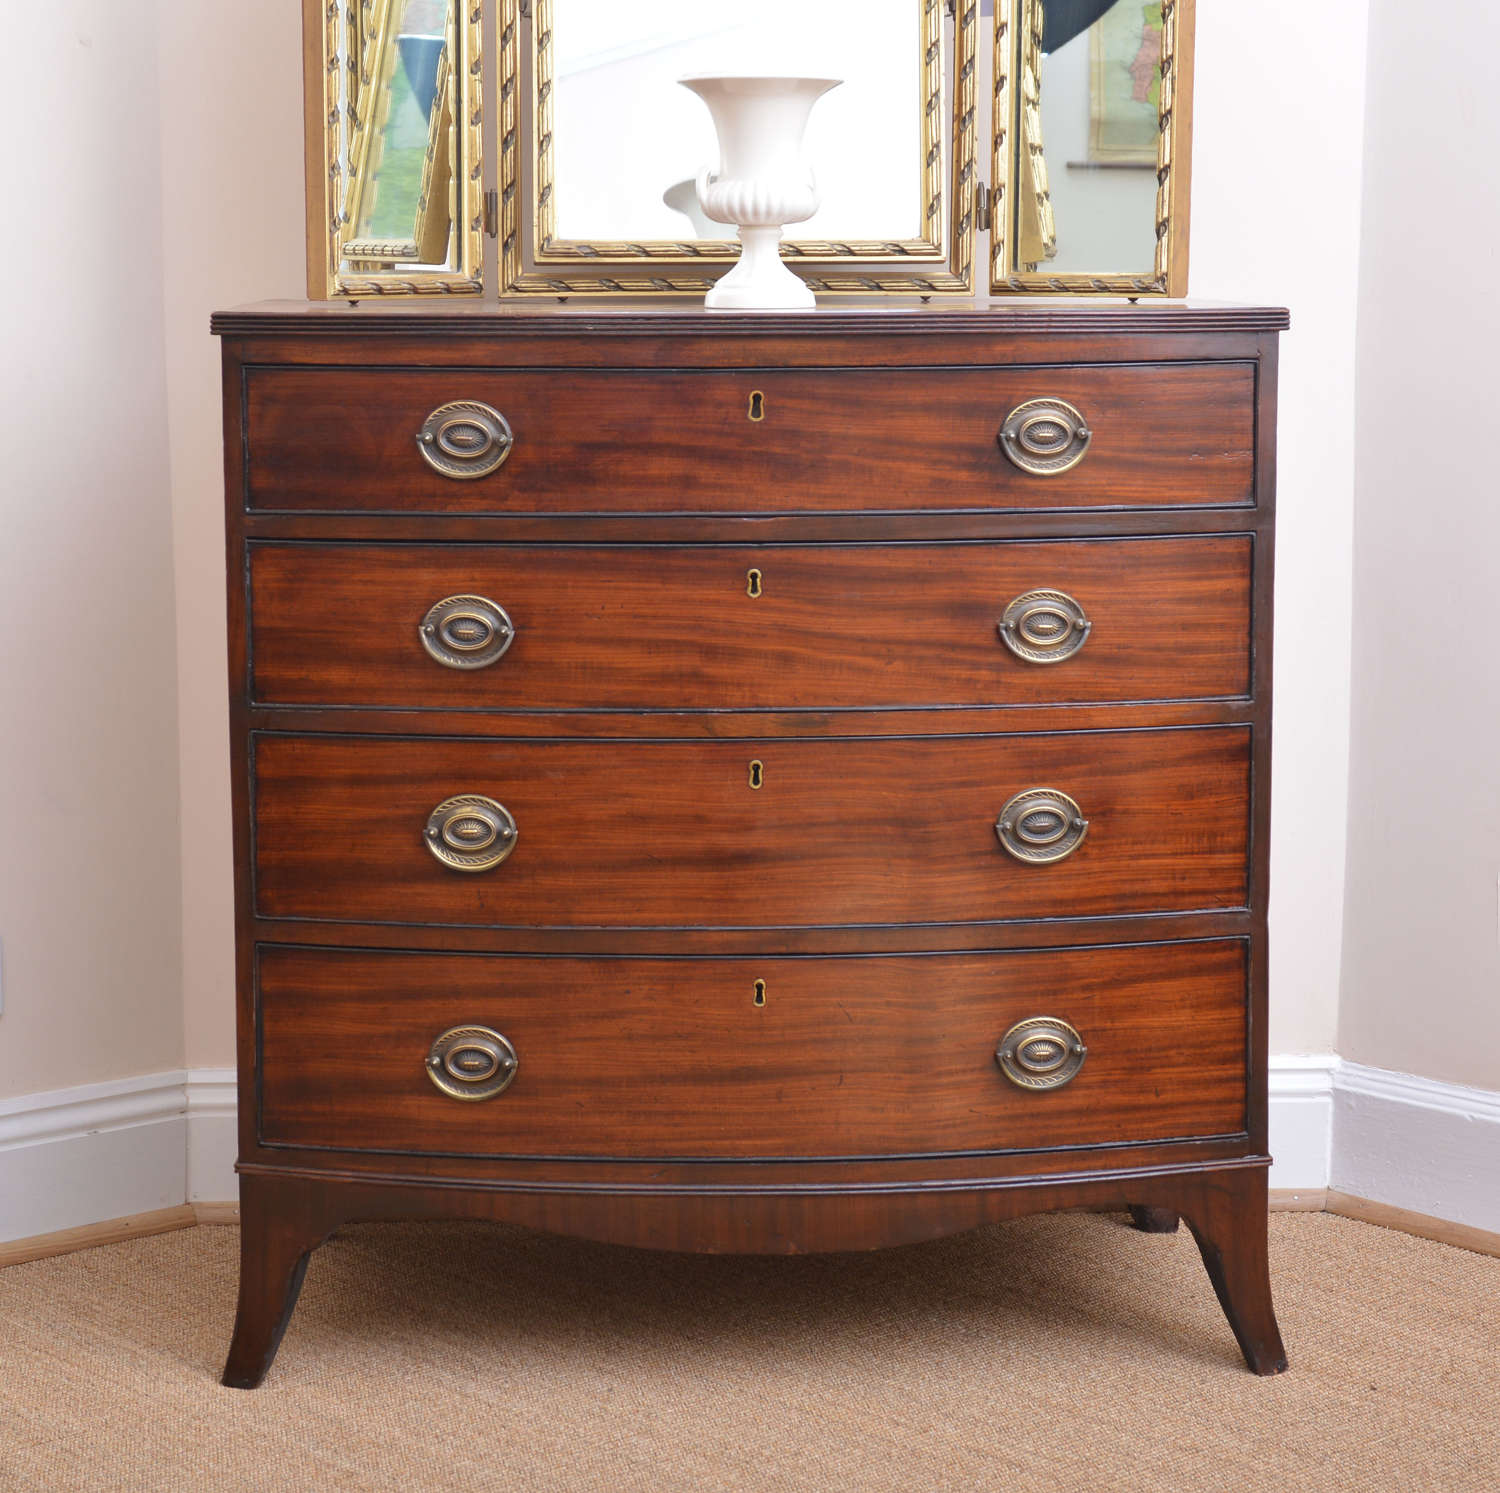 Small bow-fronted chest of drawers, circa 1830